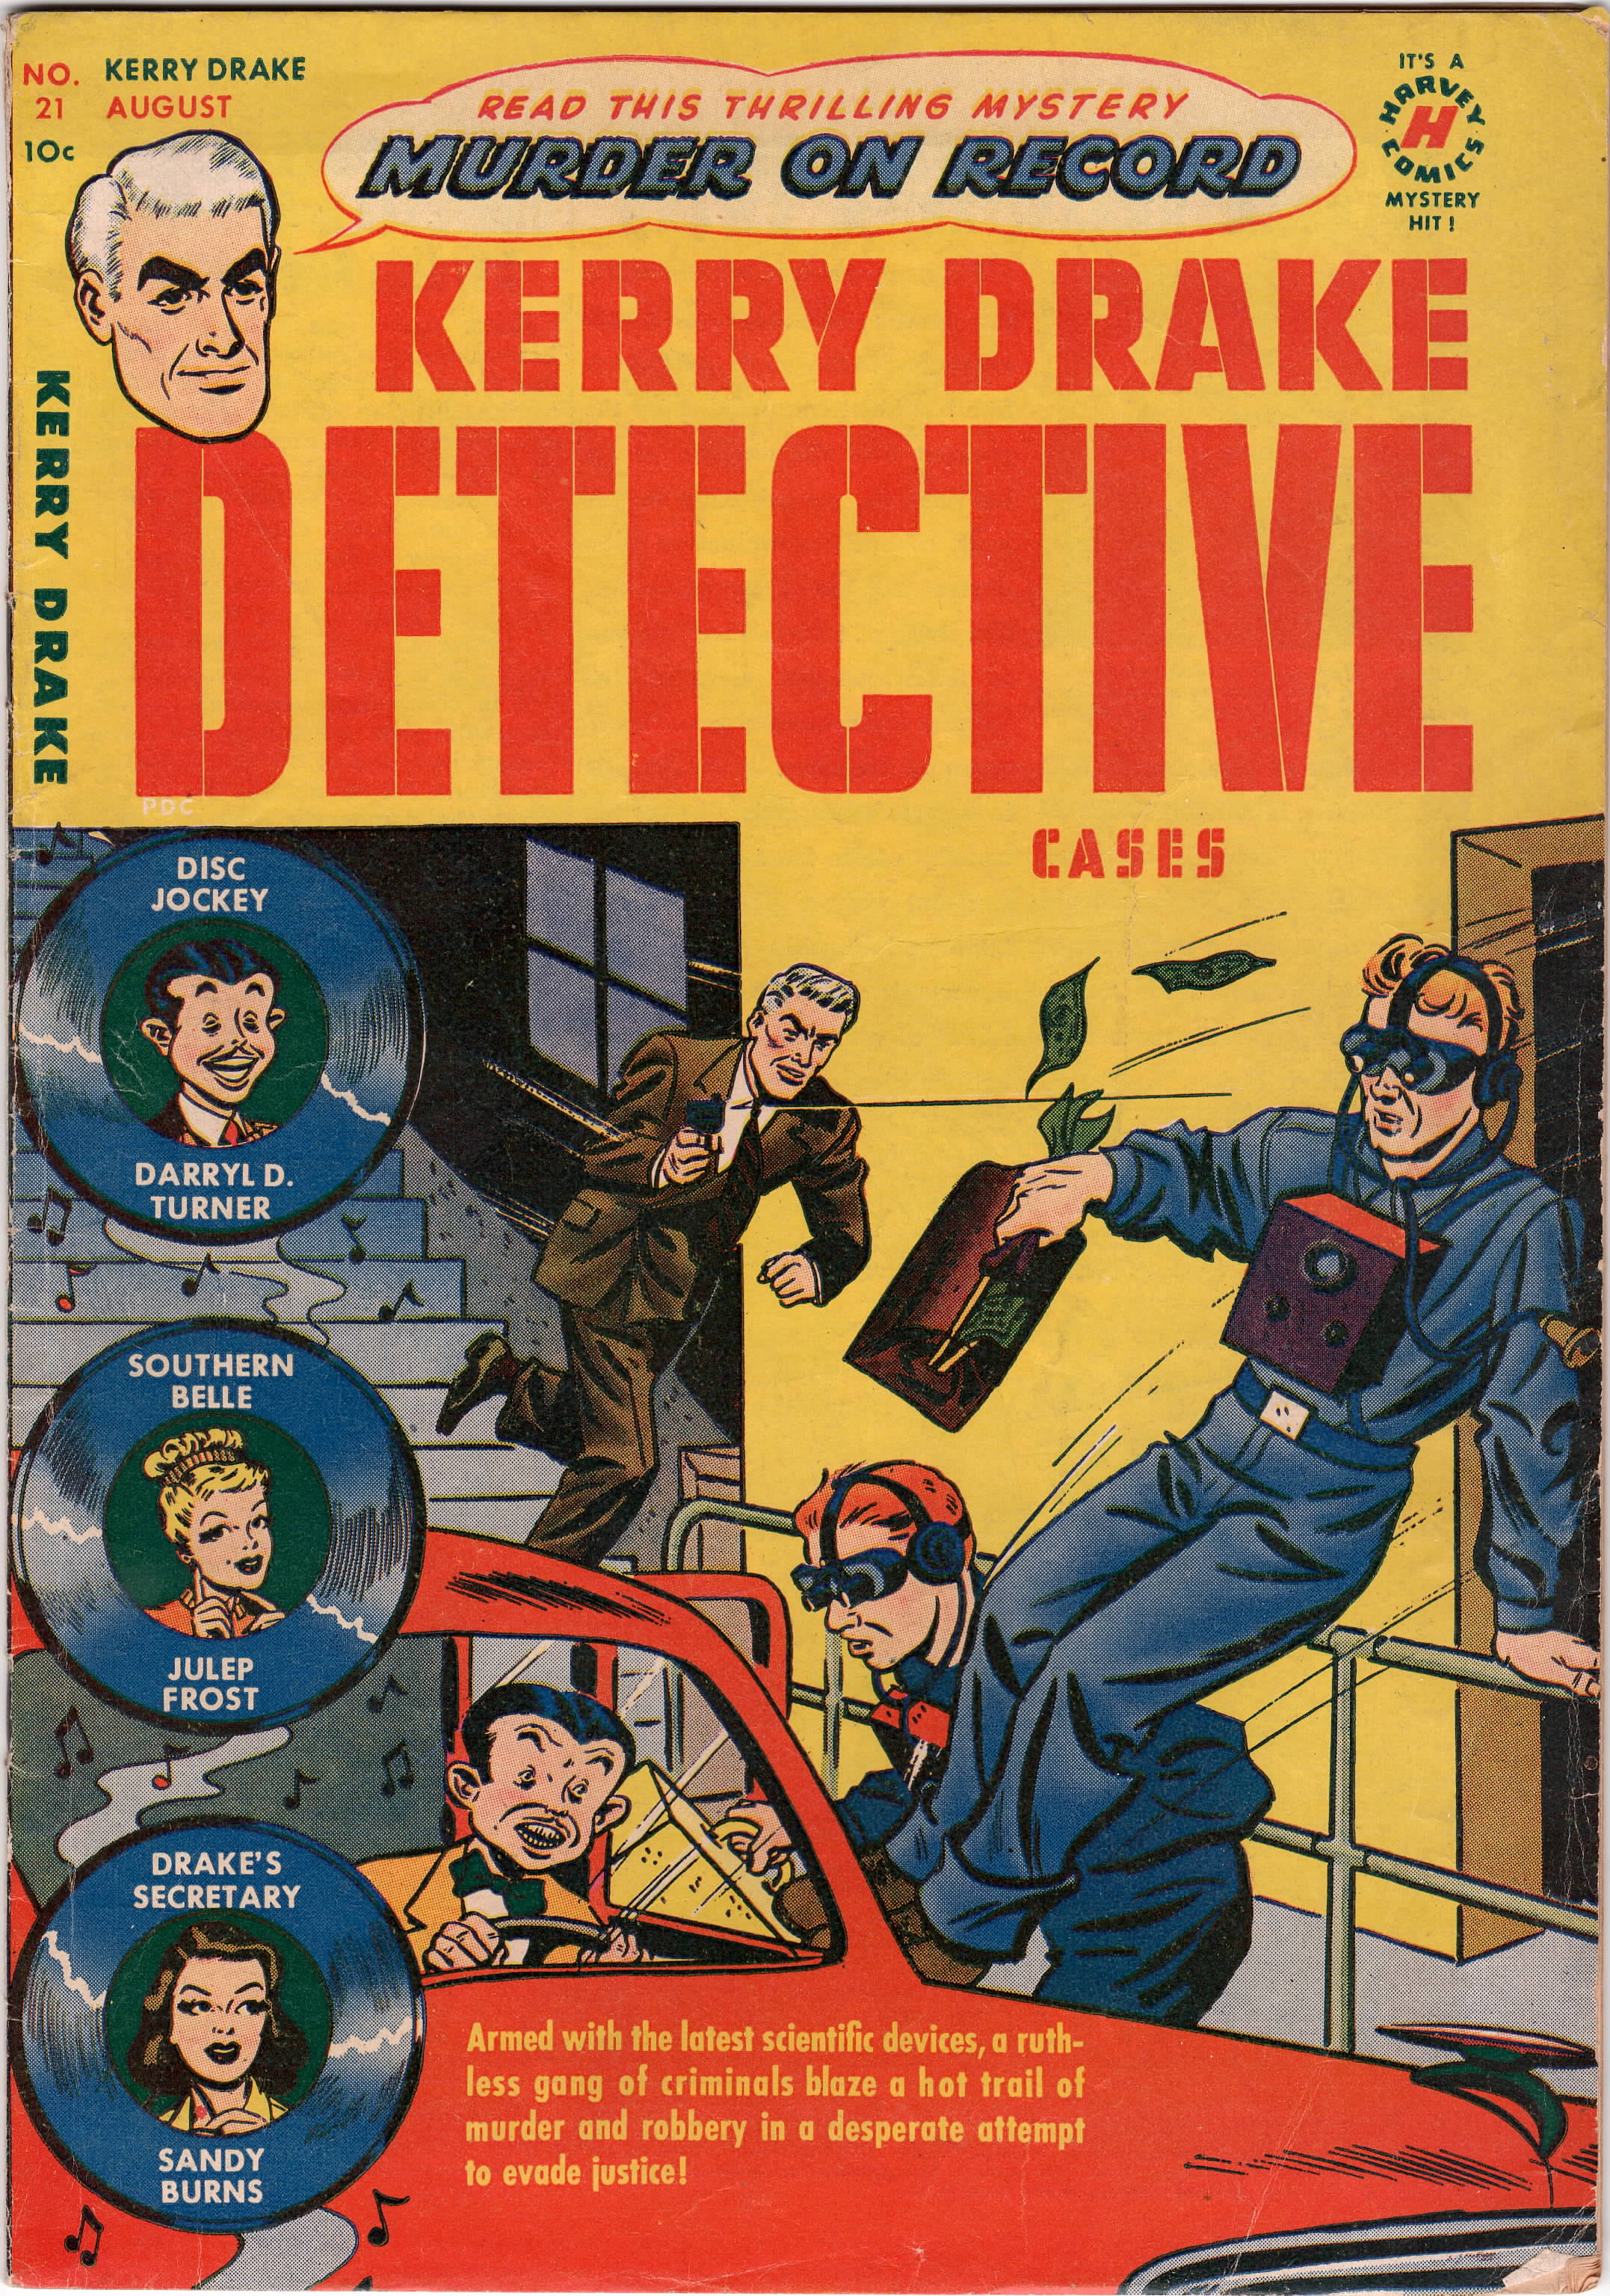 Kerry Drake Detective Cases #21